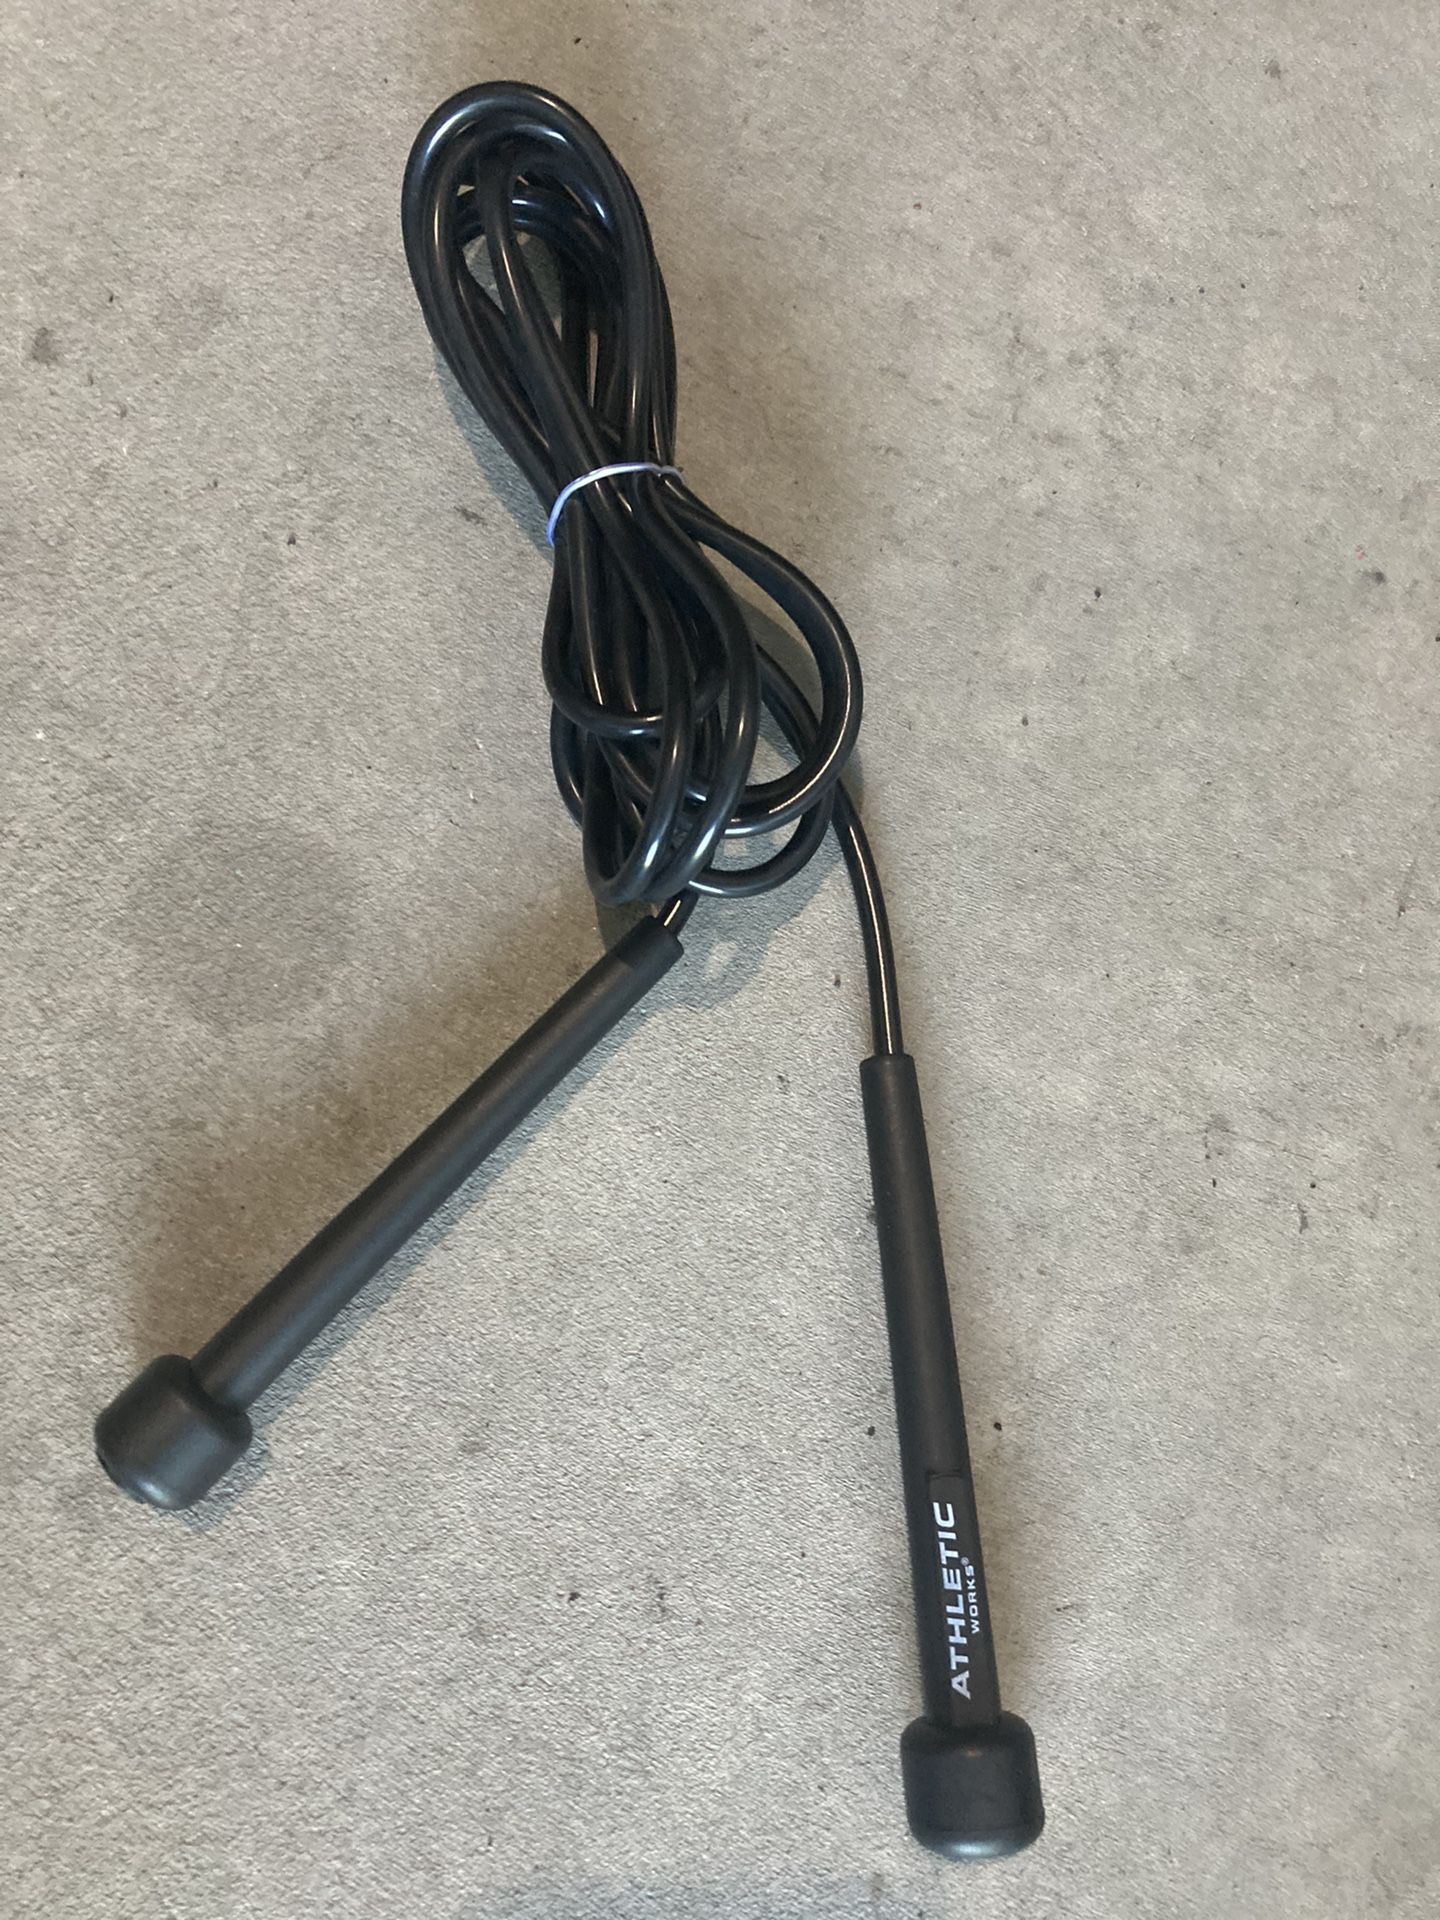 Home Gym Equipment - Jump Rope, Speed Rope